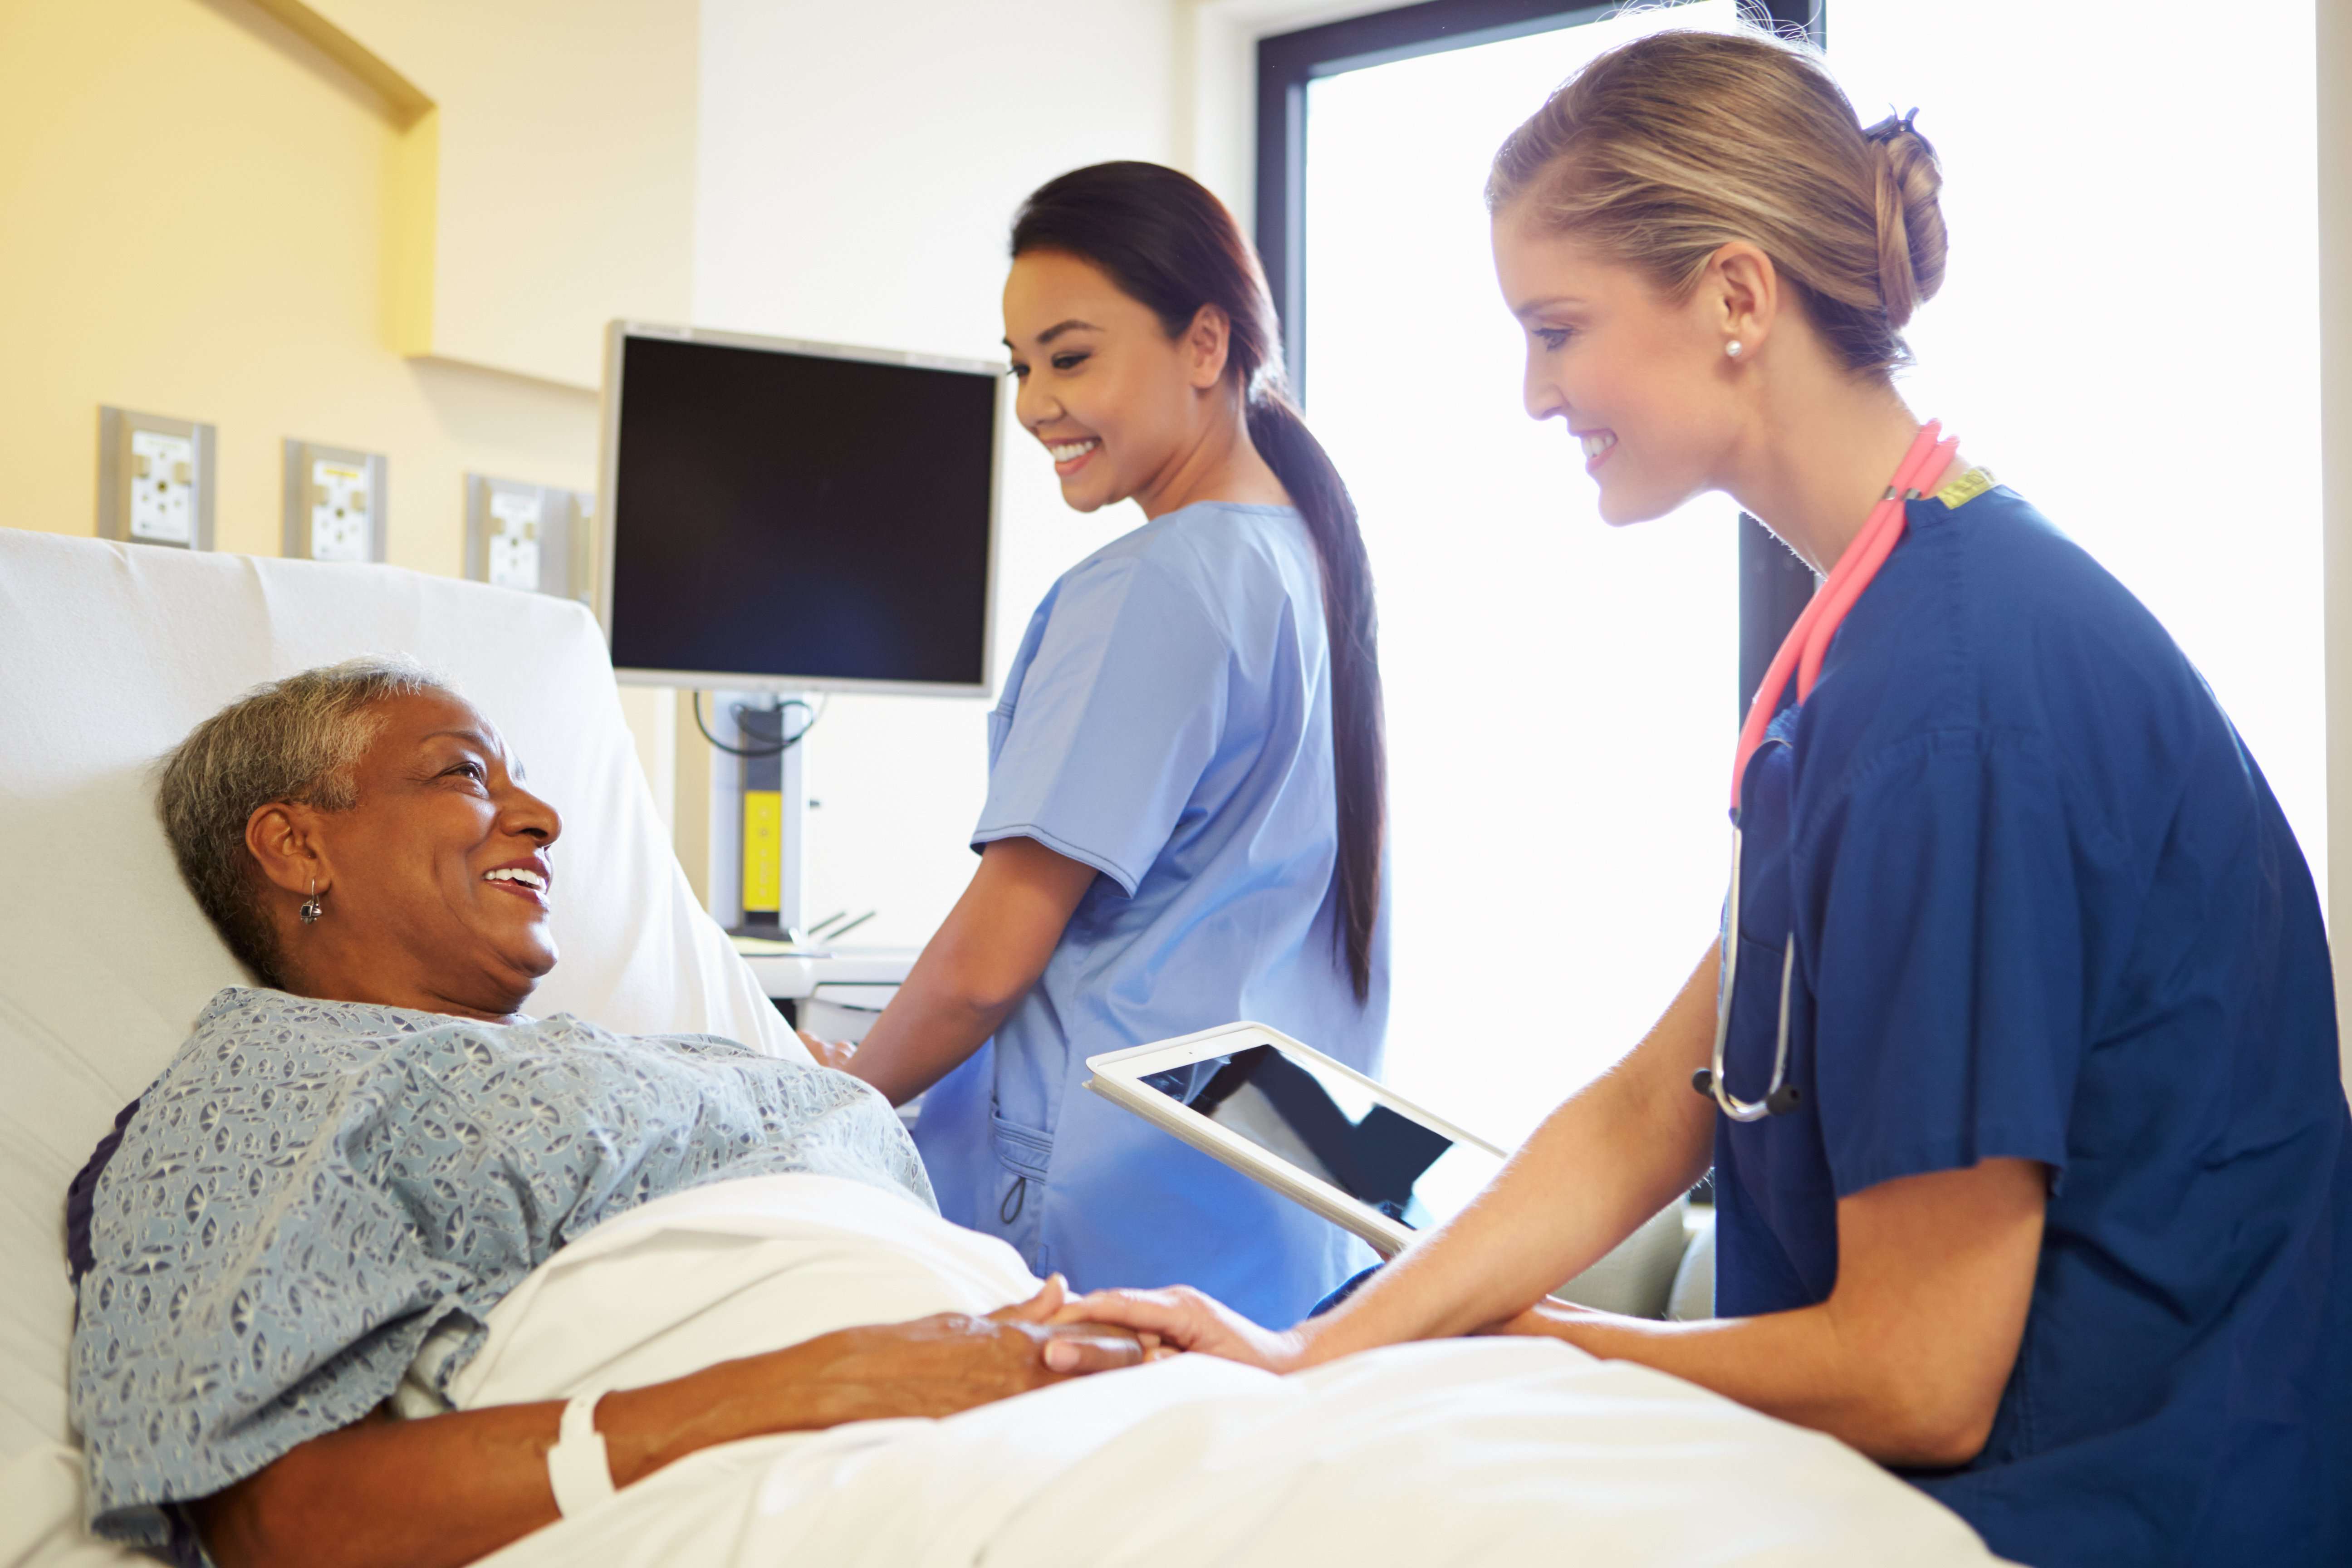 Study finds age, race disparities in hospital patient portal use